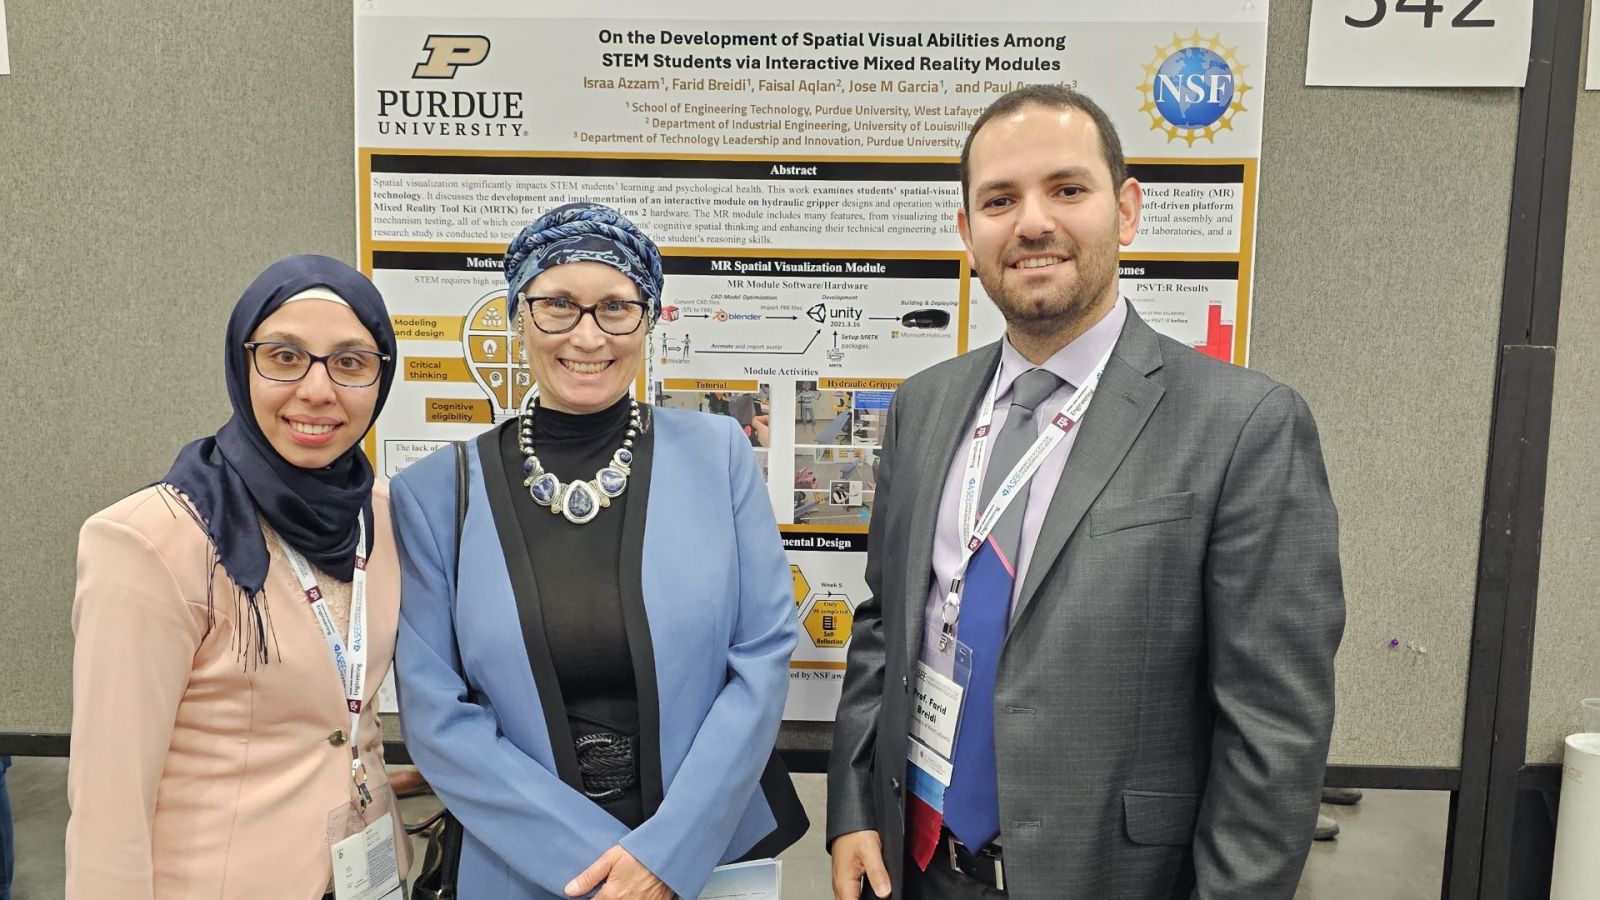 Engineering technology's Farid Breidi (right) and his PhD student Israa Azzam (left) won several awards at this year's ASEE conference. (Photo provided)